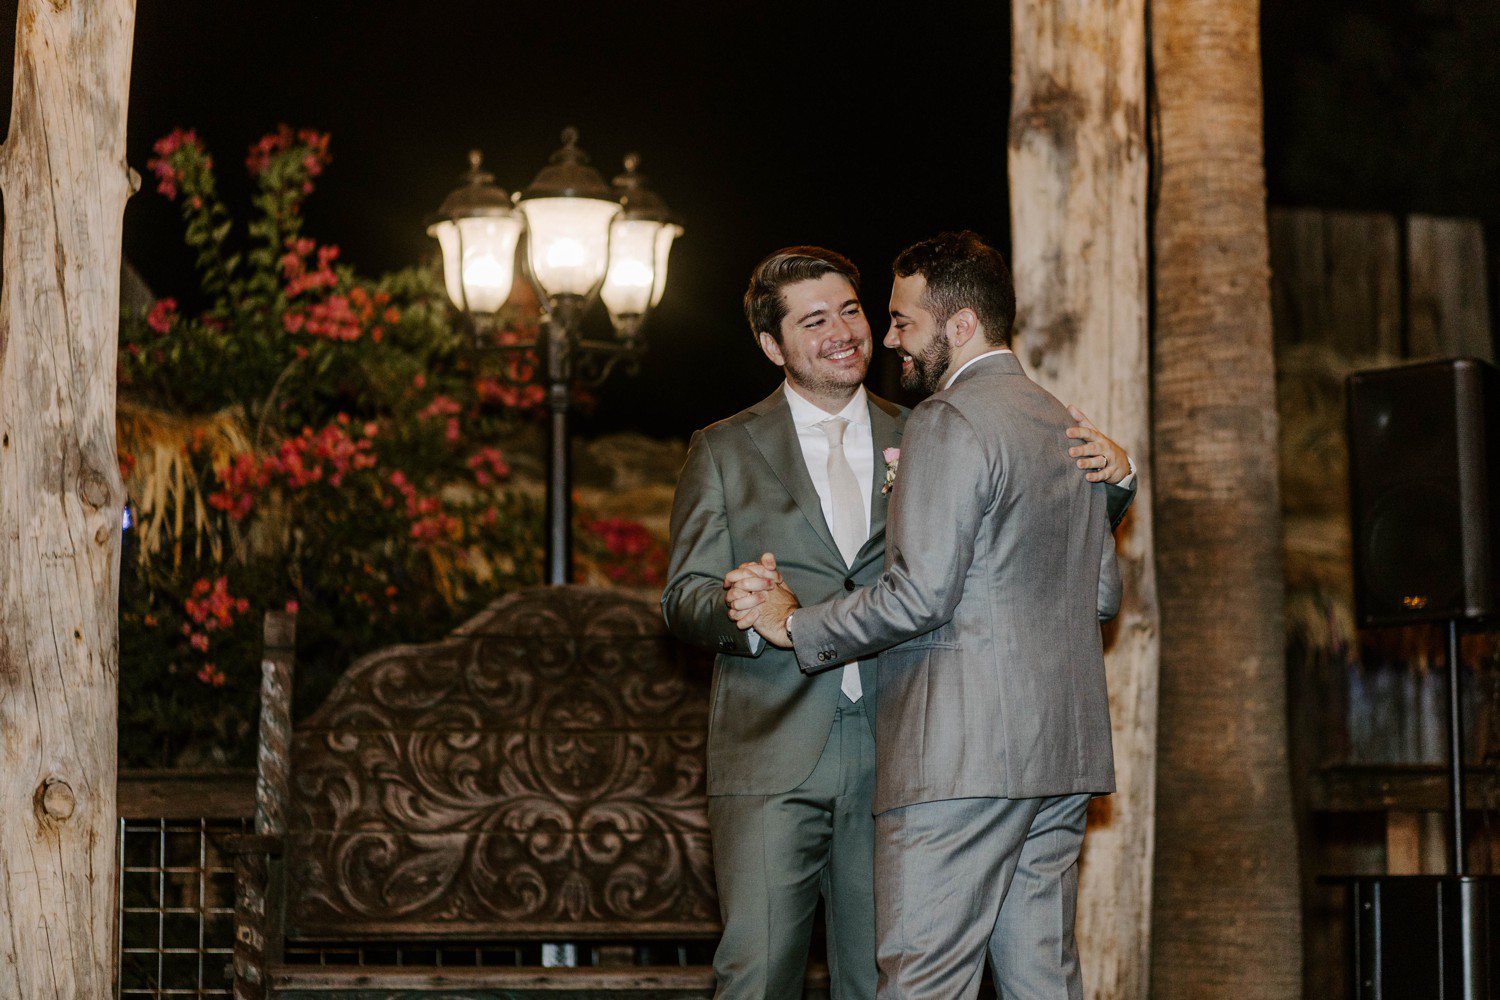 Grooms smiling during wedding first dance at Boojum Tree.